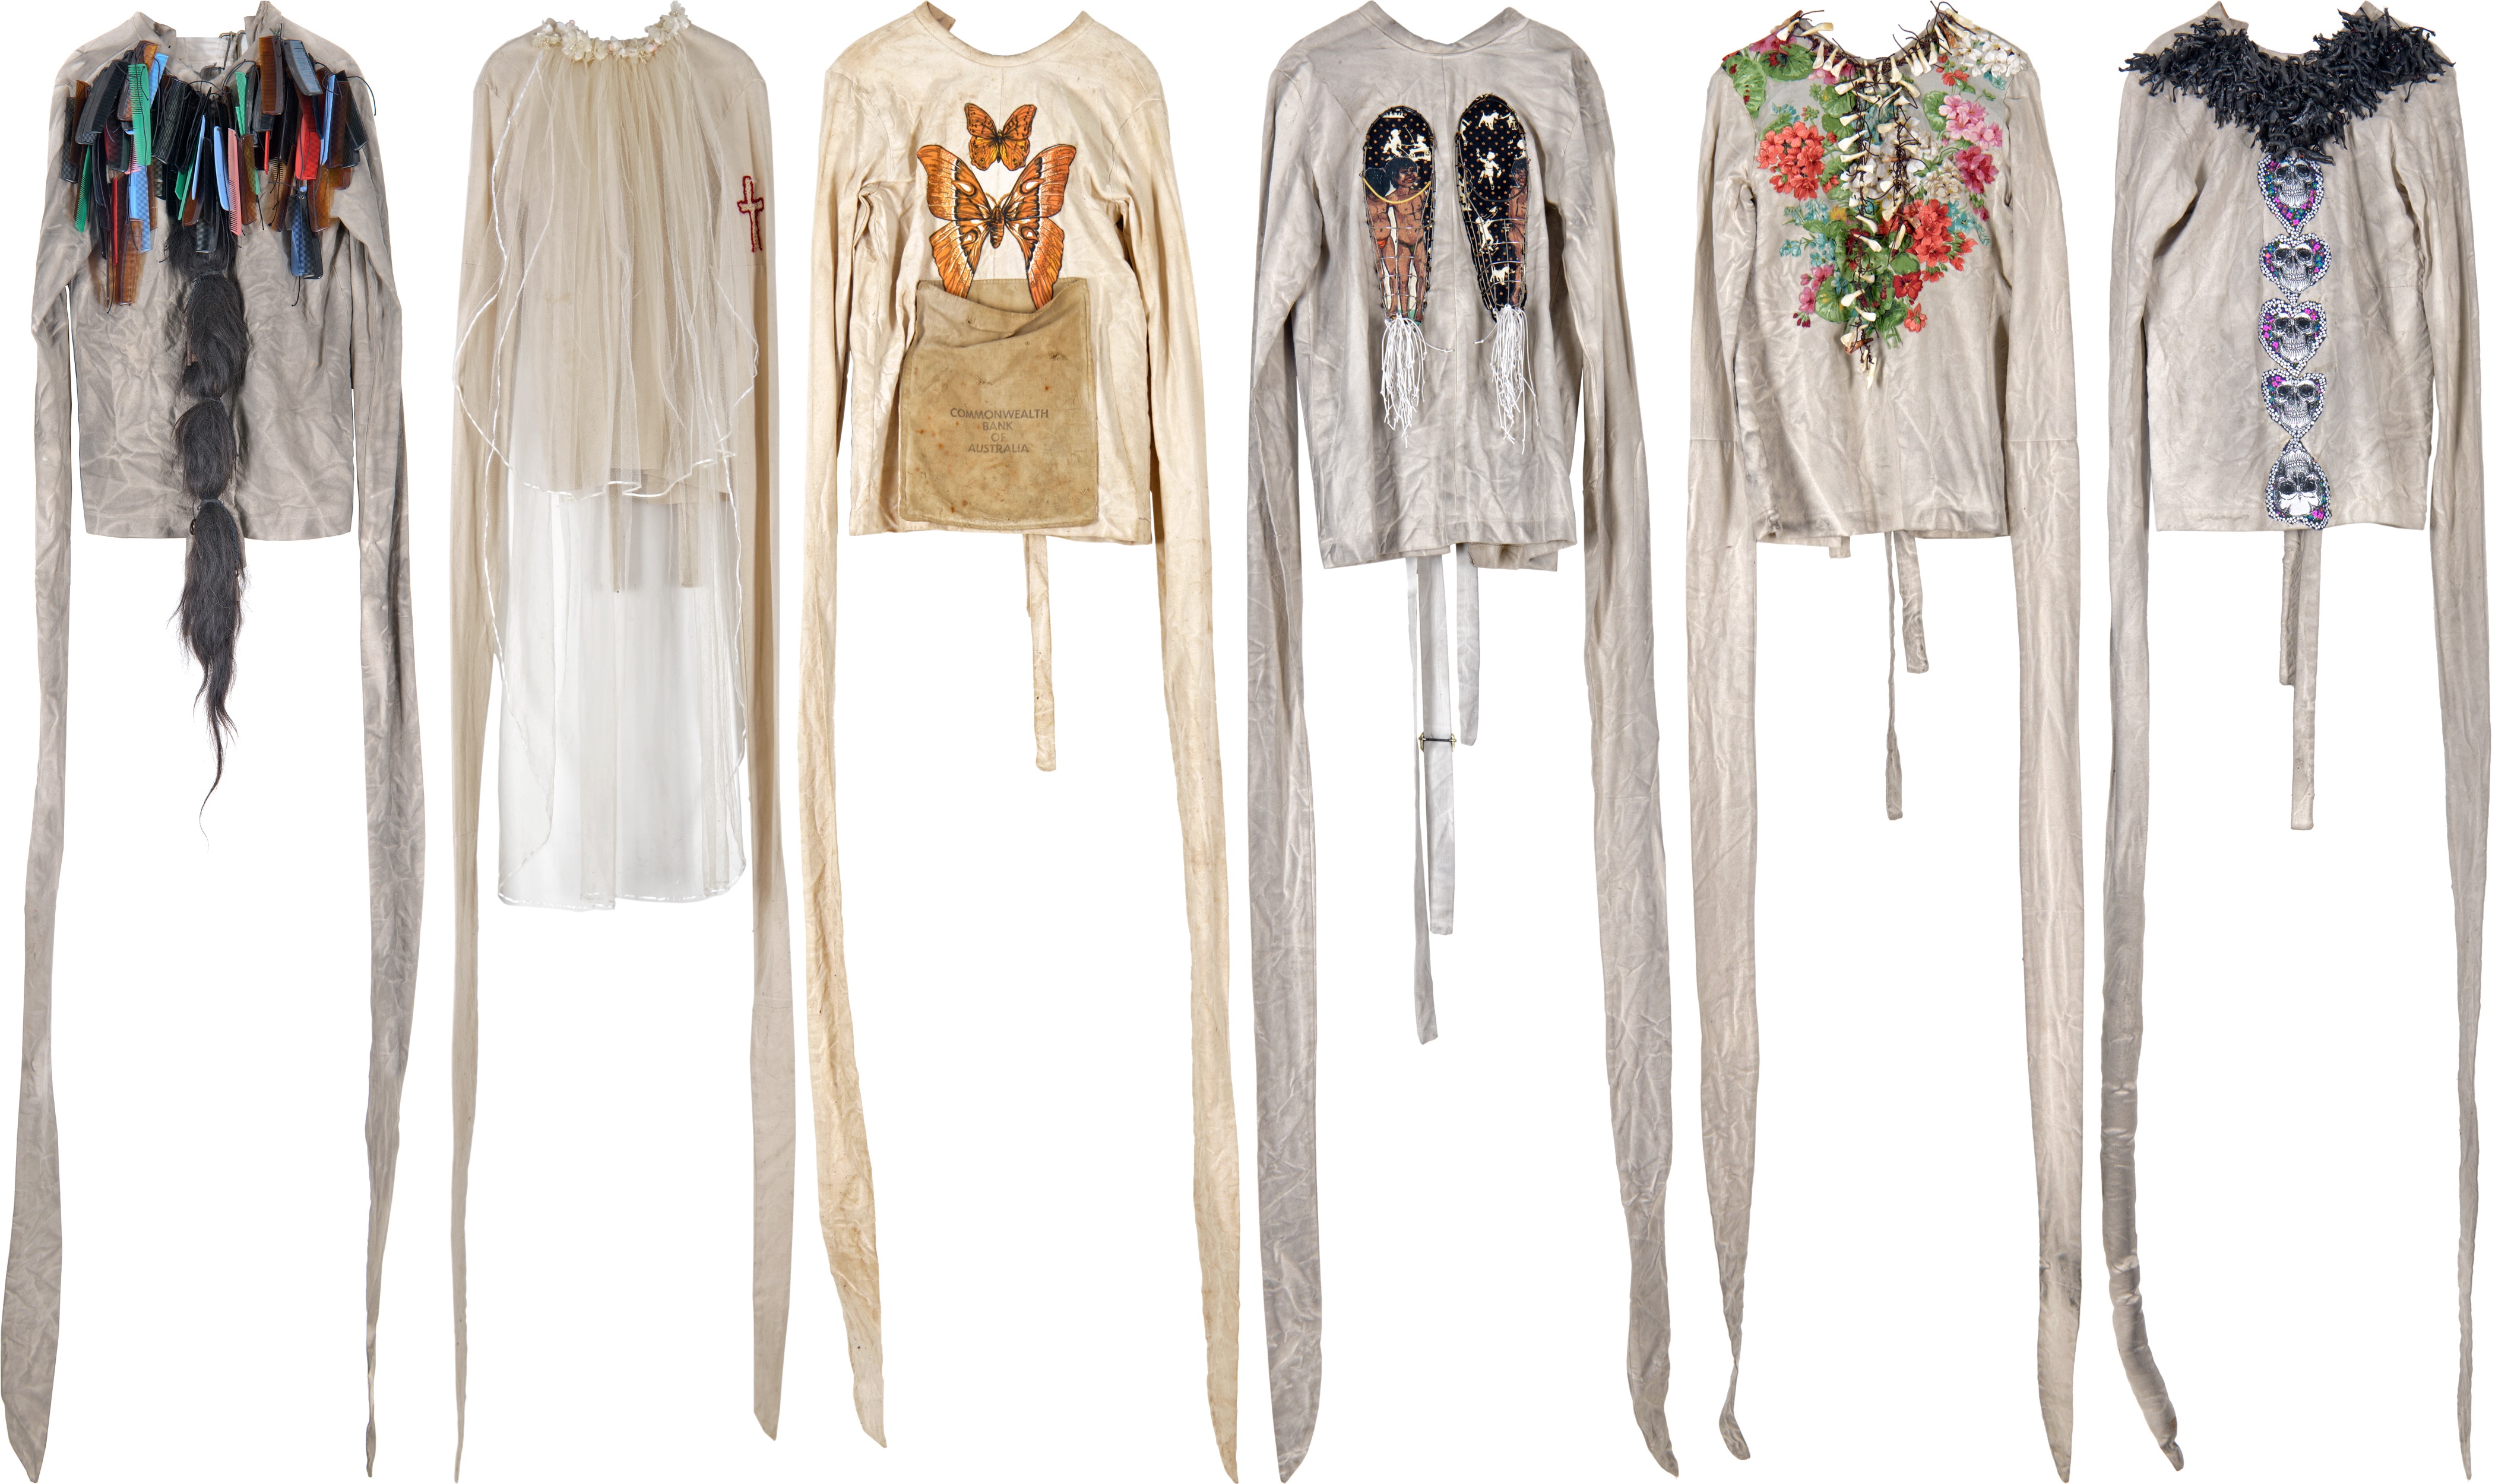 six straight jackets with images and objects attached, from left to right combs and hair, lace and embroidery, butterflies, images of people and dog muzzles, flowers and teeth, skulls and rubber